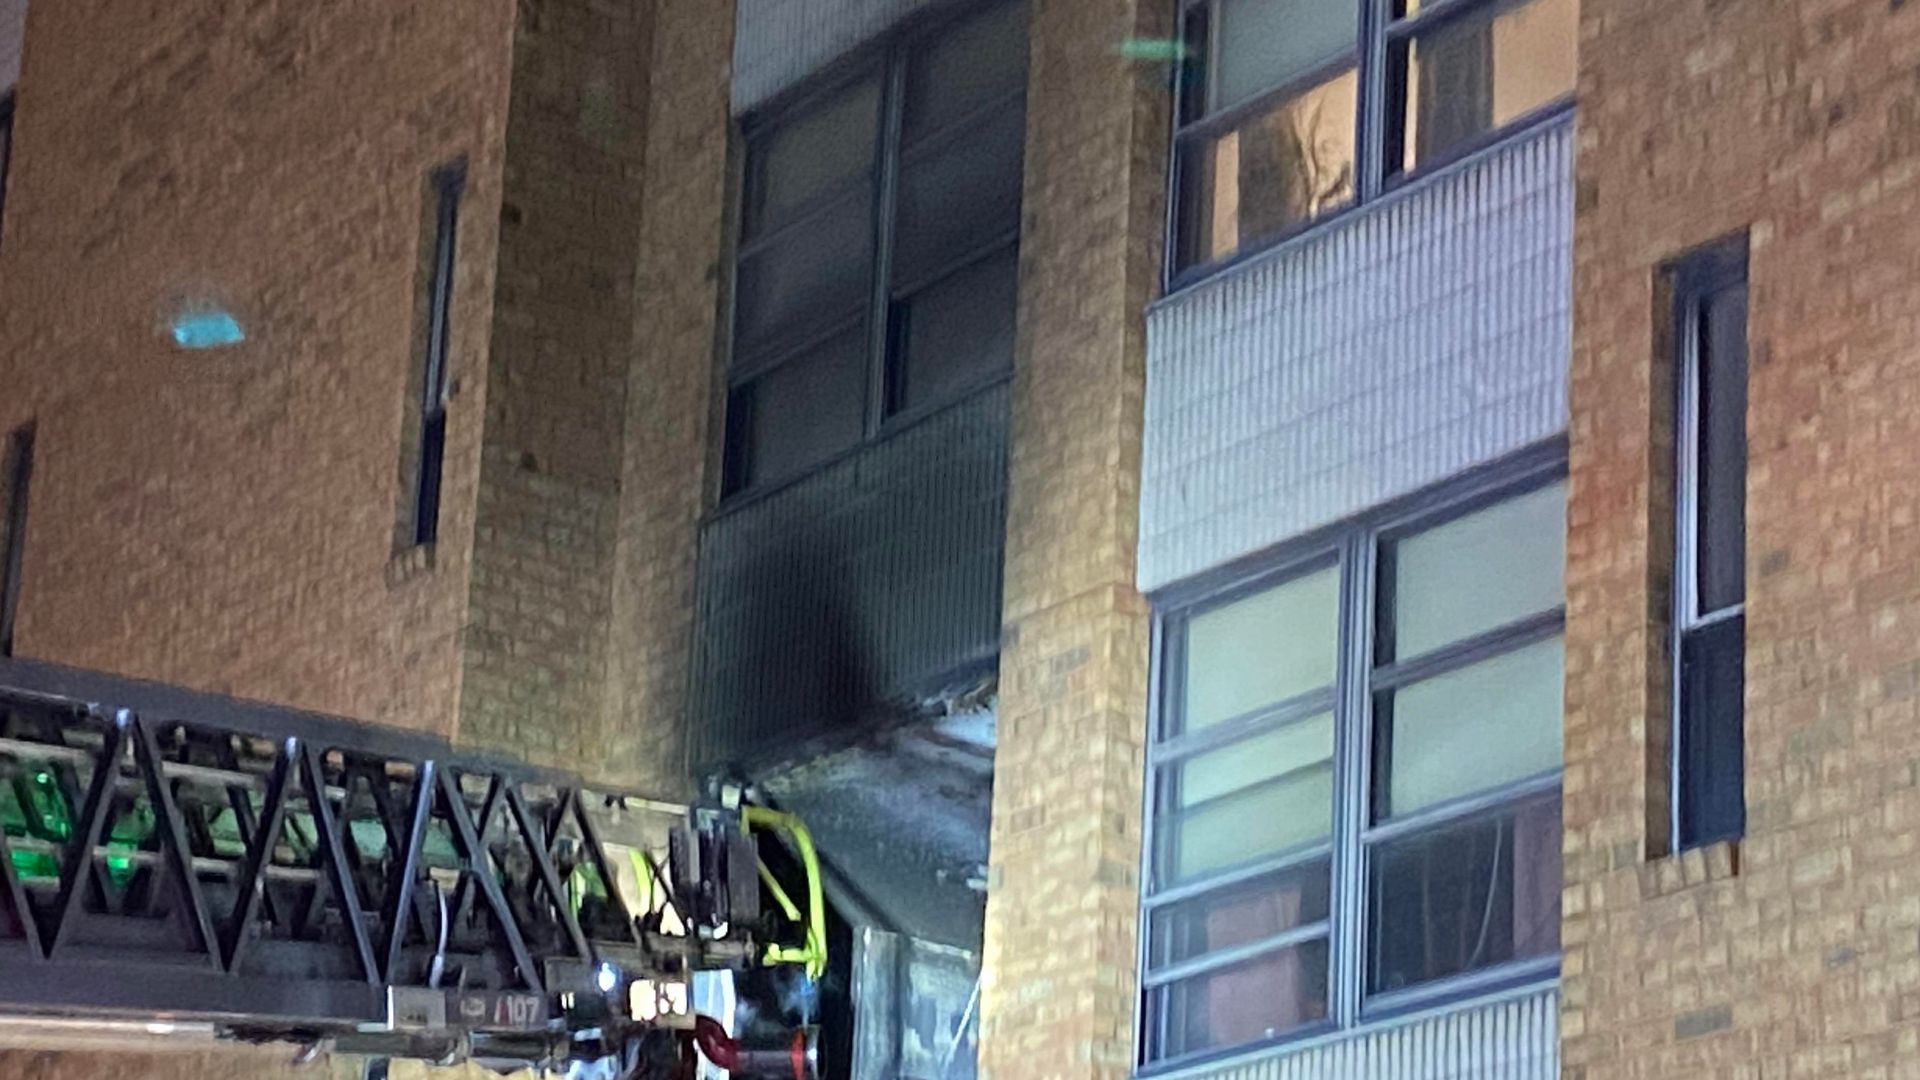 Crews responded to a 3-alarm fire in a high-rise senior apartment building in Luzerne County on Thursday evening.